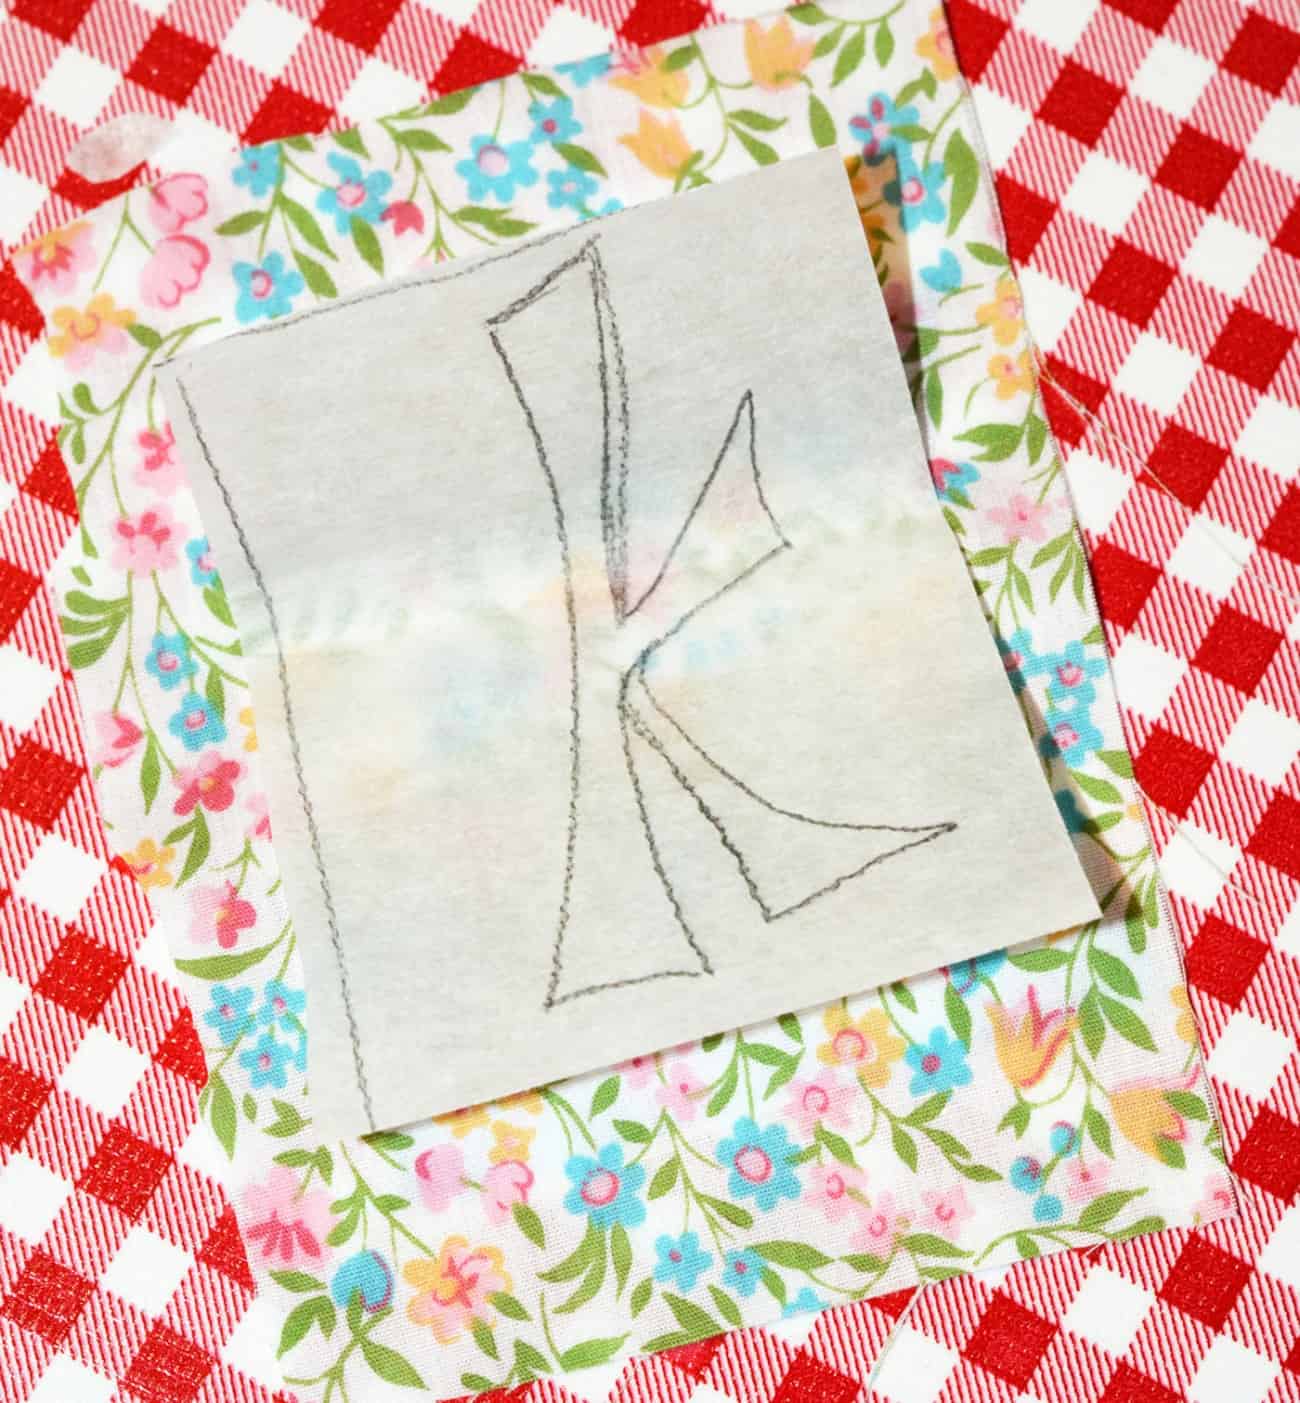 Letter K on a sheet of steam a seam paper on top of fabric